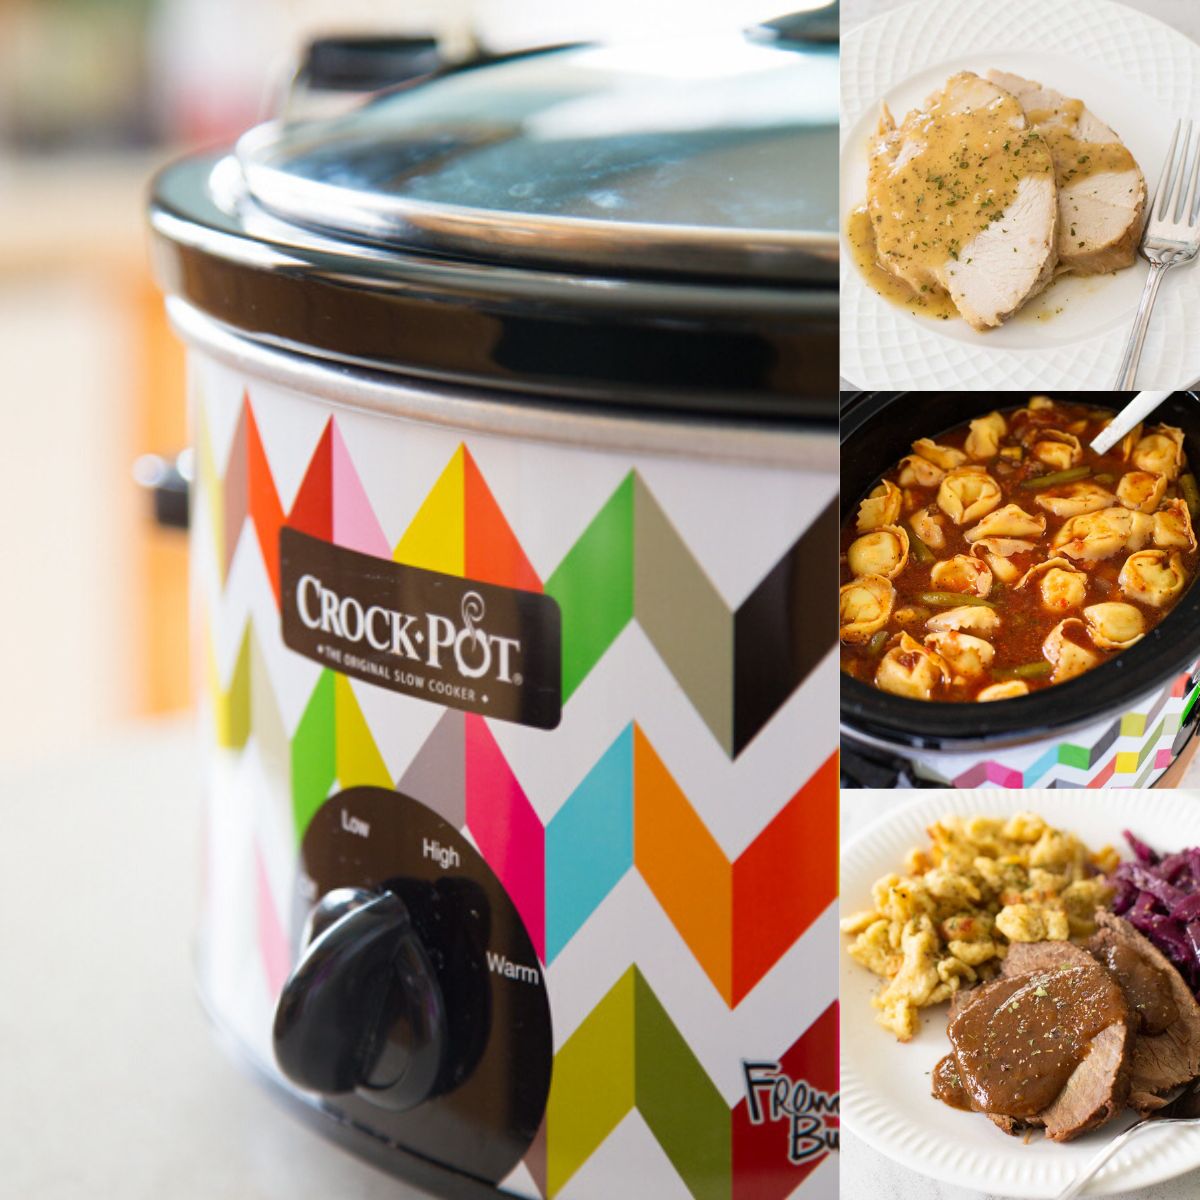 16 Recipes for the rectangle crock pot I want for Christmas ideas